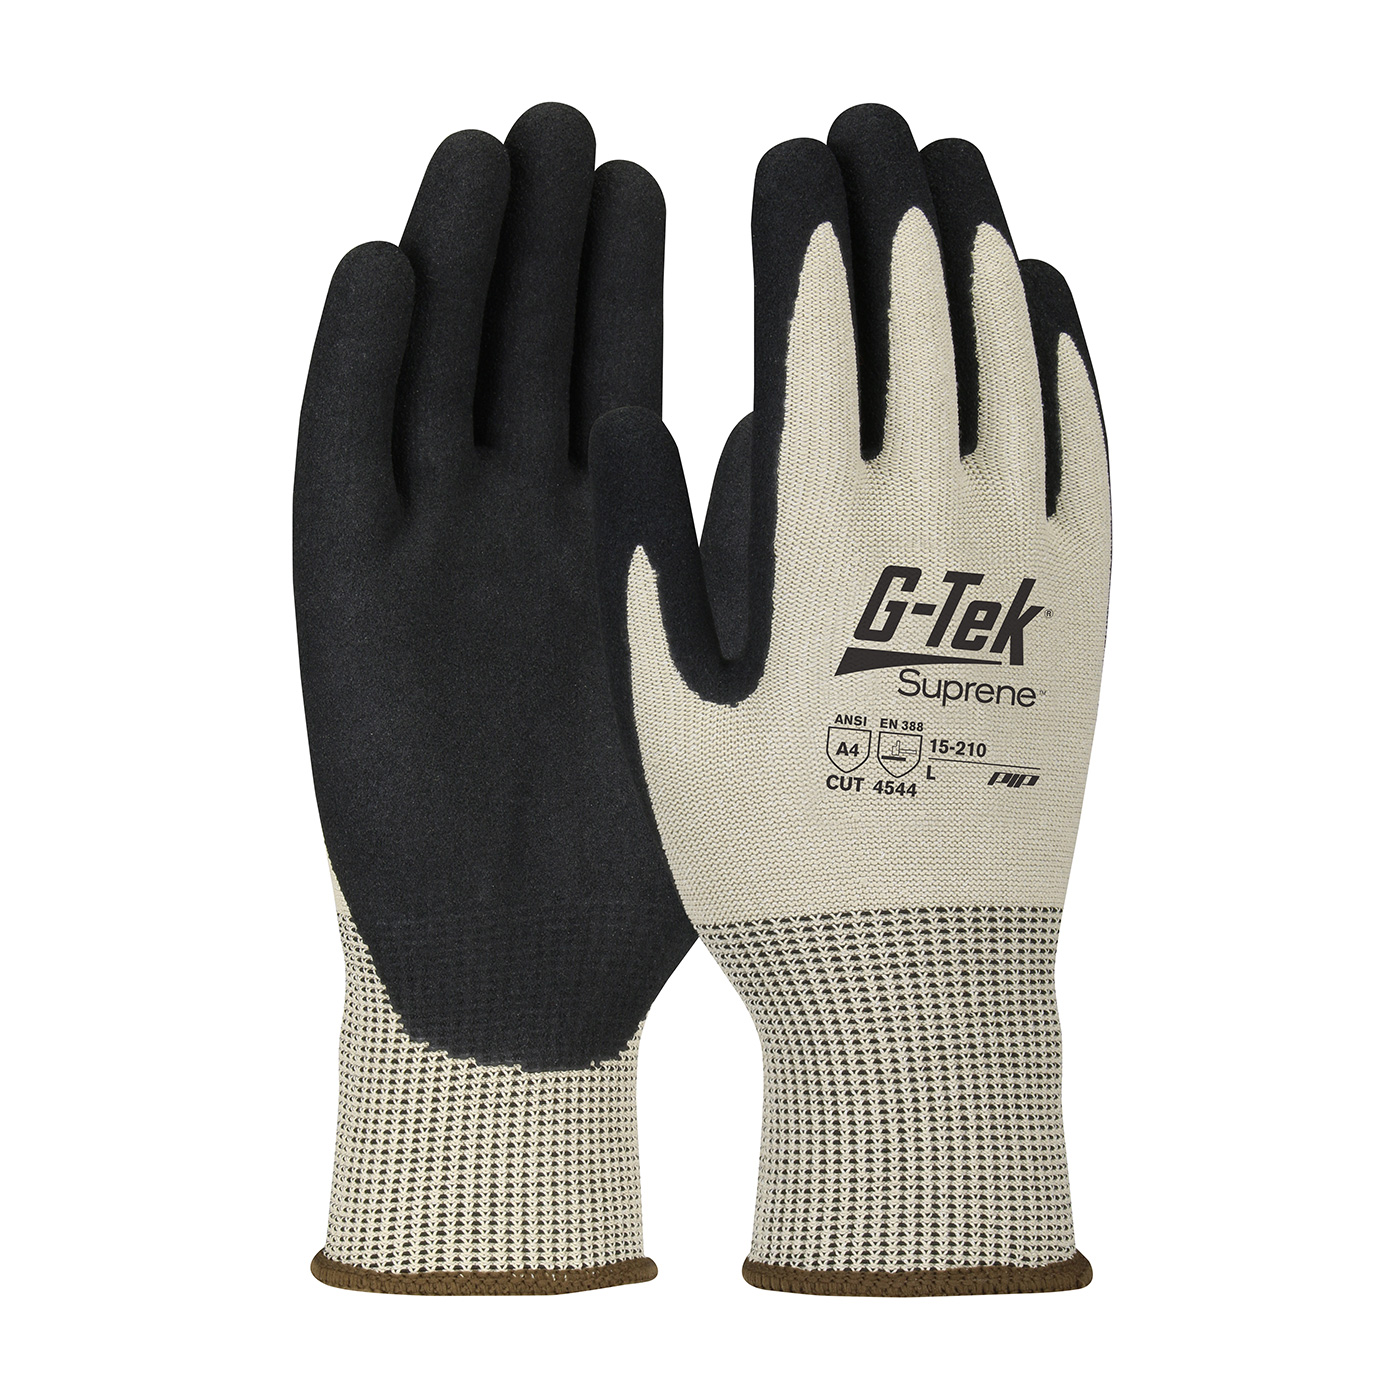 15-210 PIP® G-Tek® Suprene™ Palm and Fingers Nitrile Coated MicroSurface seamless knit gloves 